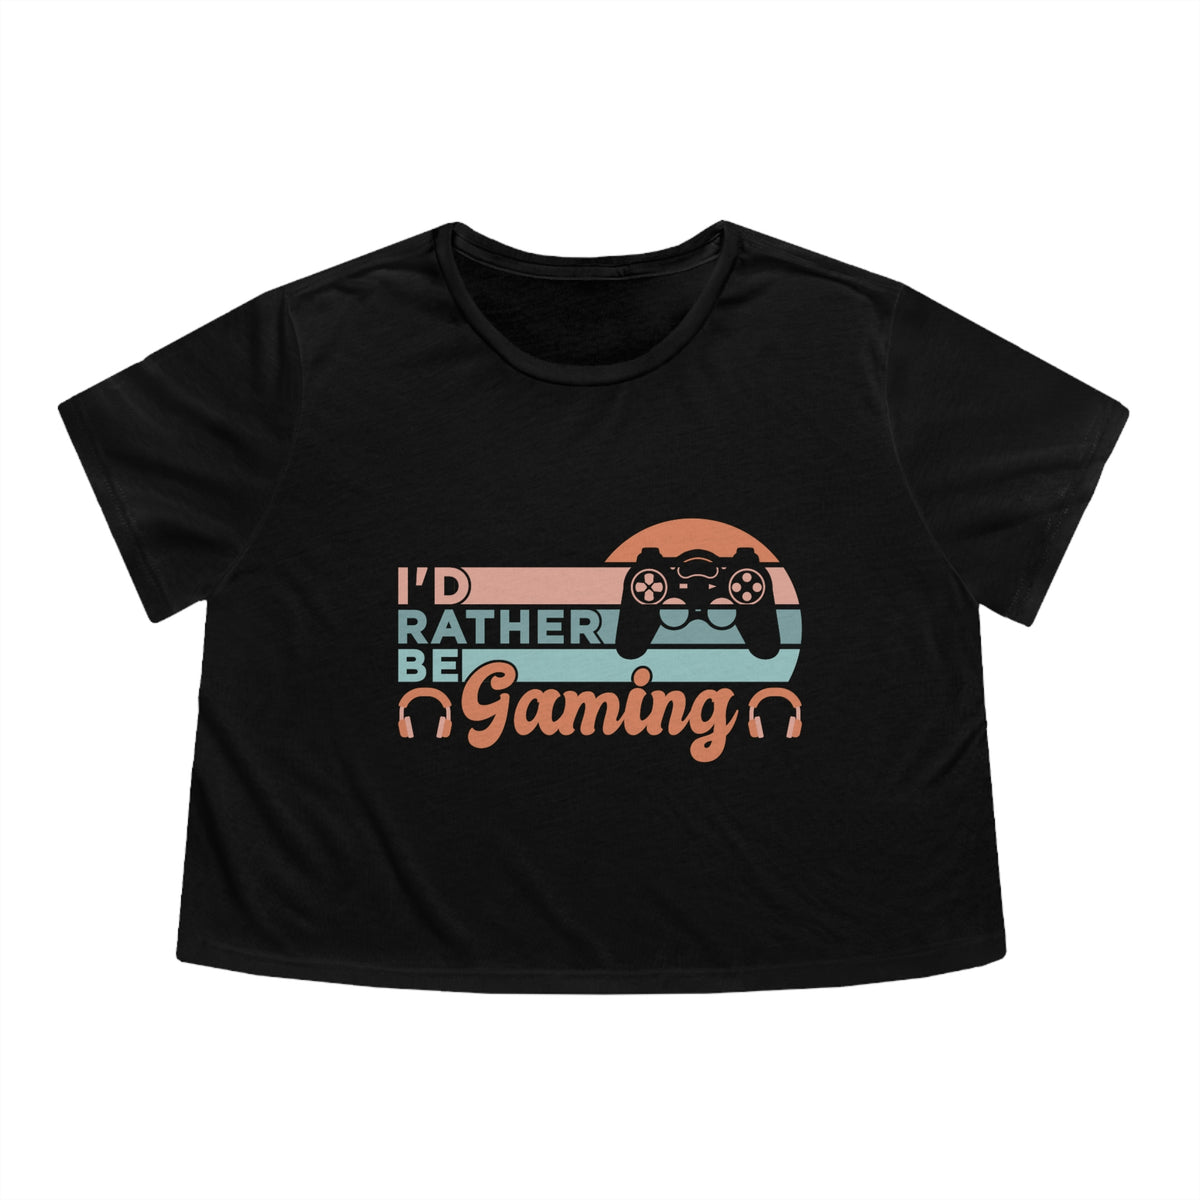 I'd Rather Be Gaming l Crop Tee